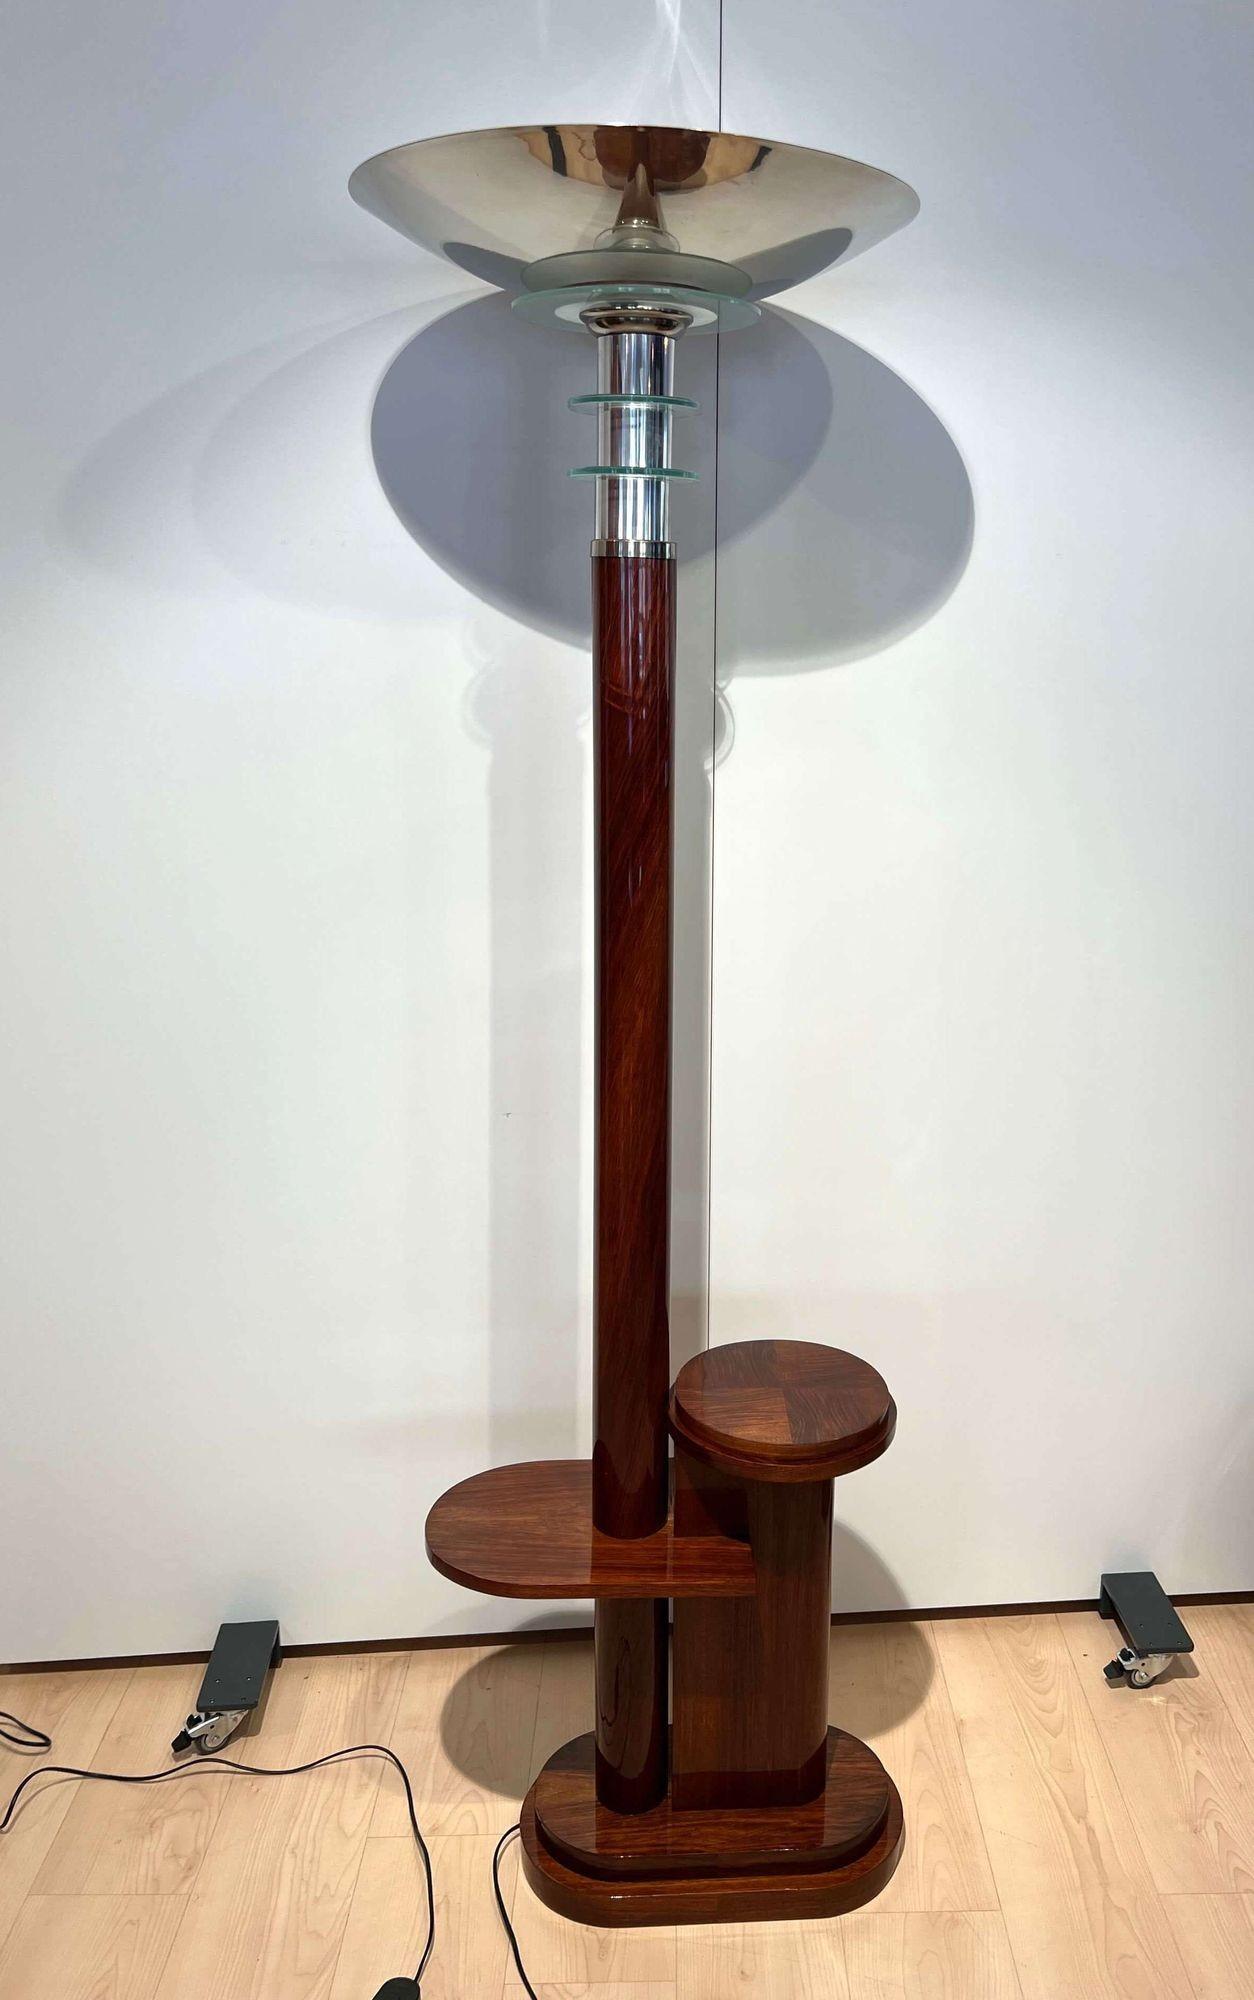 Art Deco floor lamp with side table from France about 1930.
 
Walnut veneered and solid, hand polished with shellac
 
Original chromed shade. Chromed cuff and decorative glass circles in clear and frosted glass.
Long cable with floor switch and